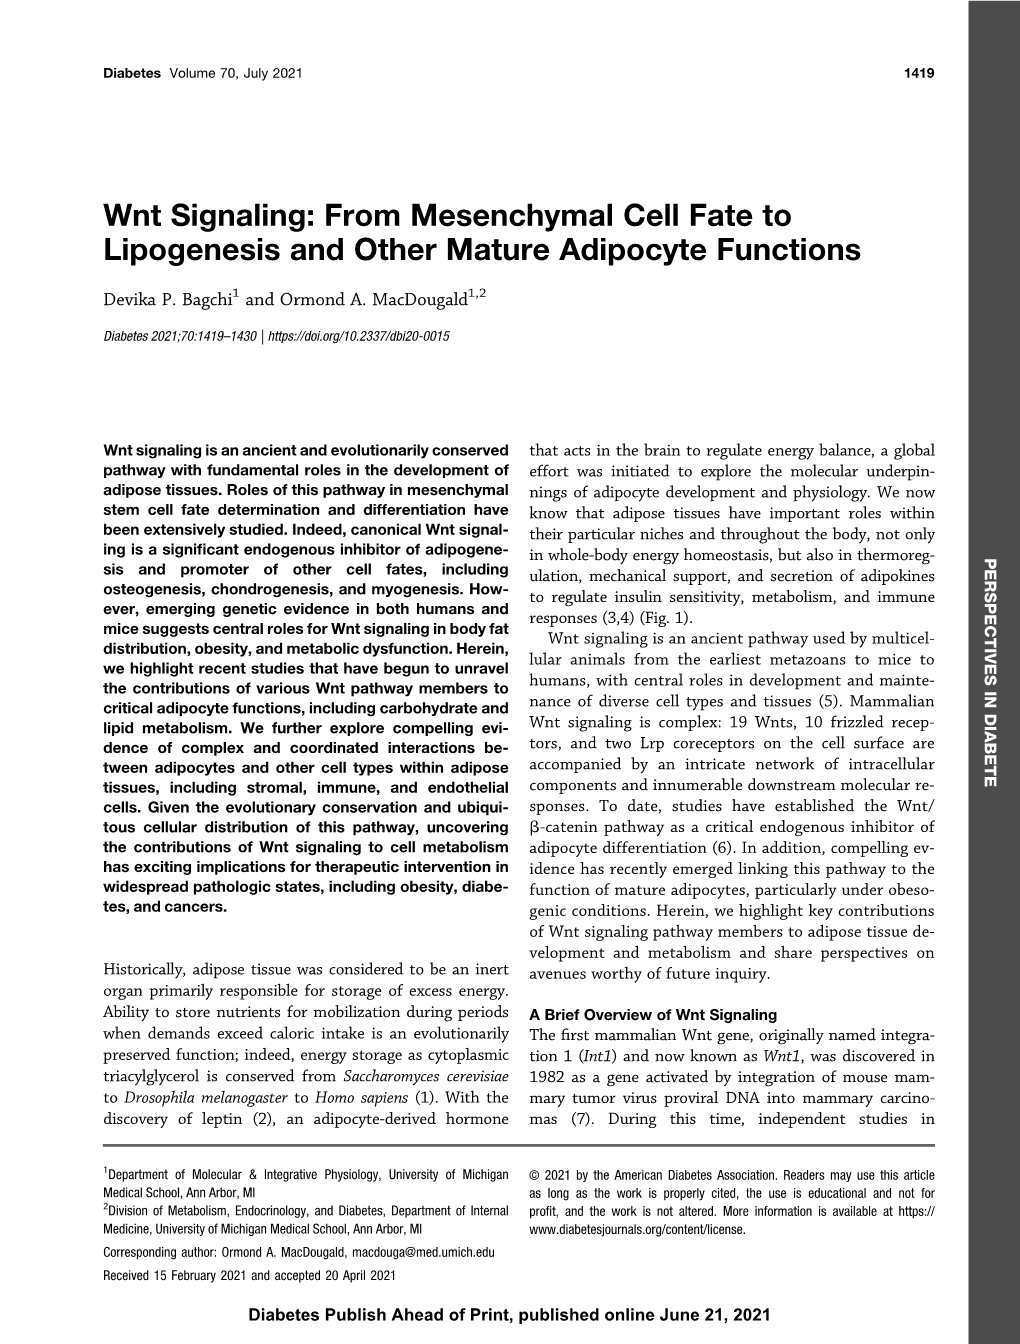 Wnt Signaling: from Mesenchymal Cell Fate to Lipogenesis and Other Mature Adipocyte Functions